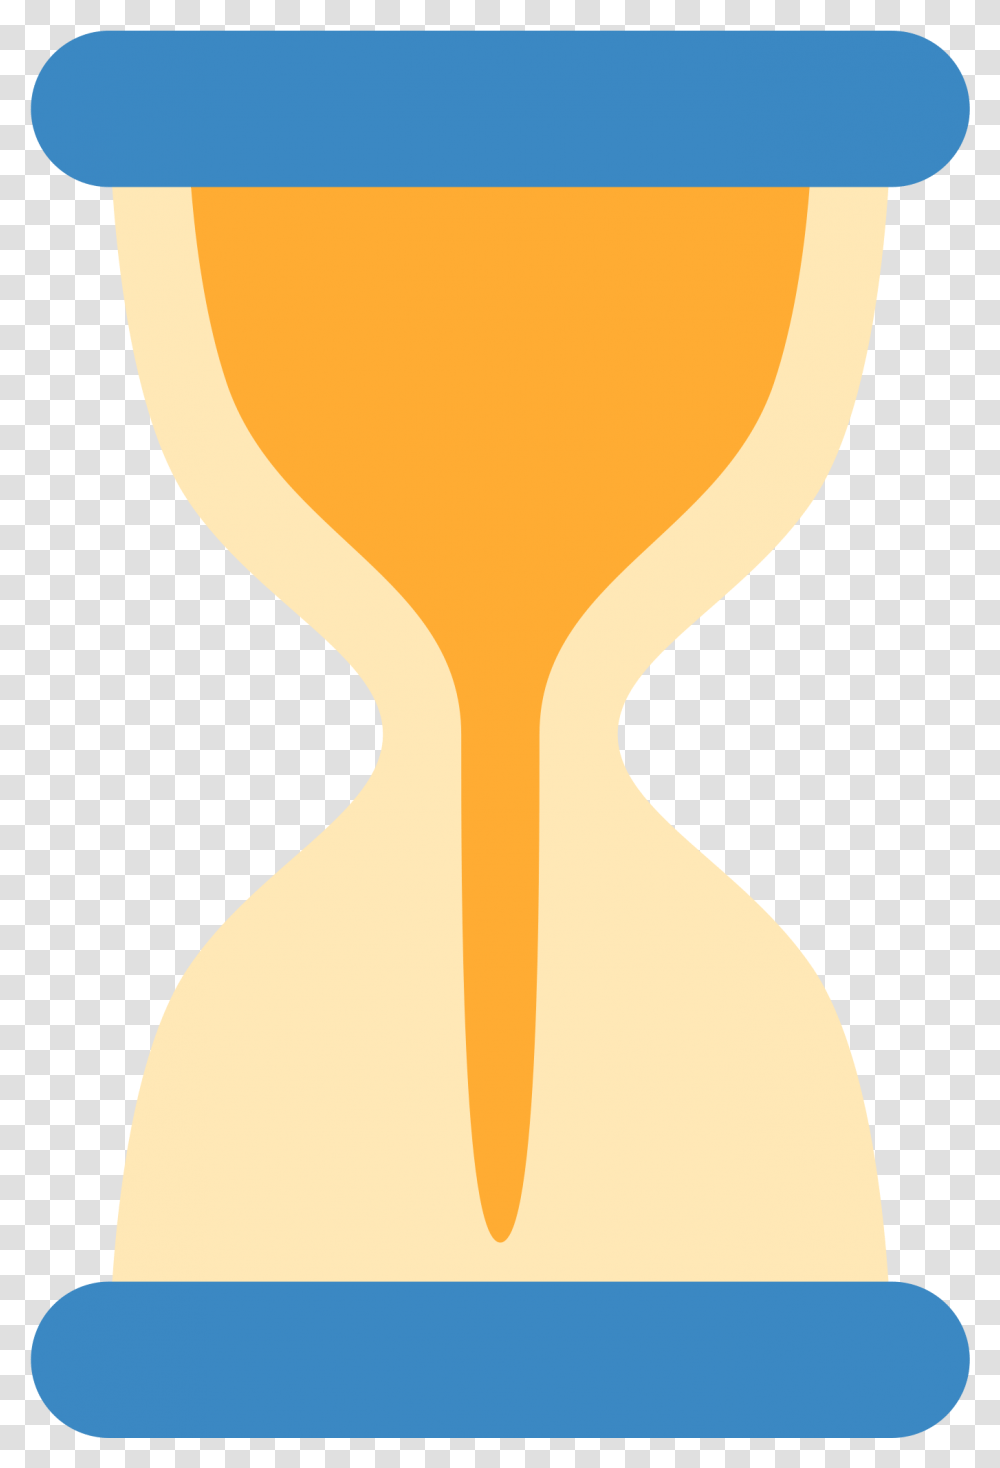 Hourglass With Flowing Sand Sand Clock Icon Transparent Png